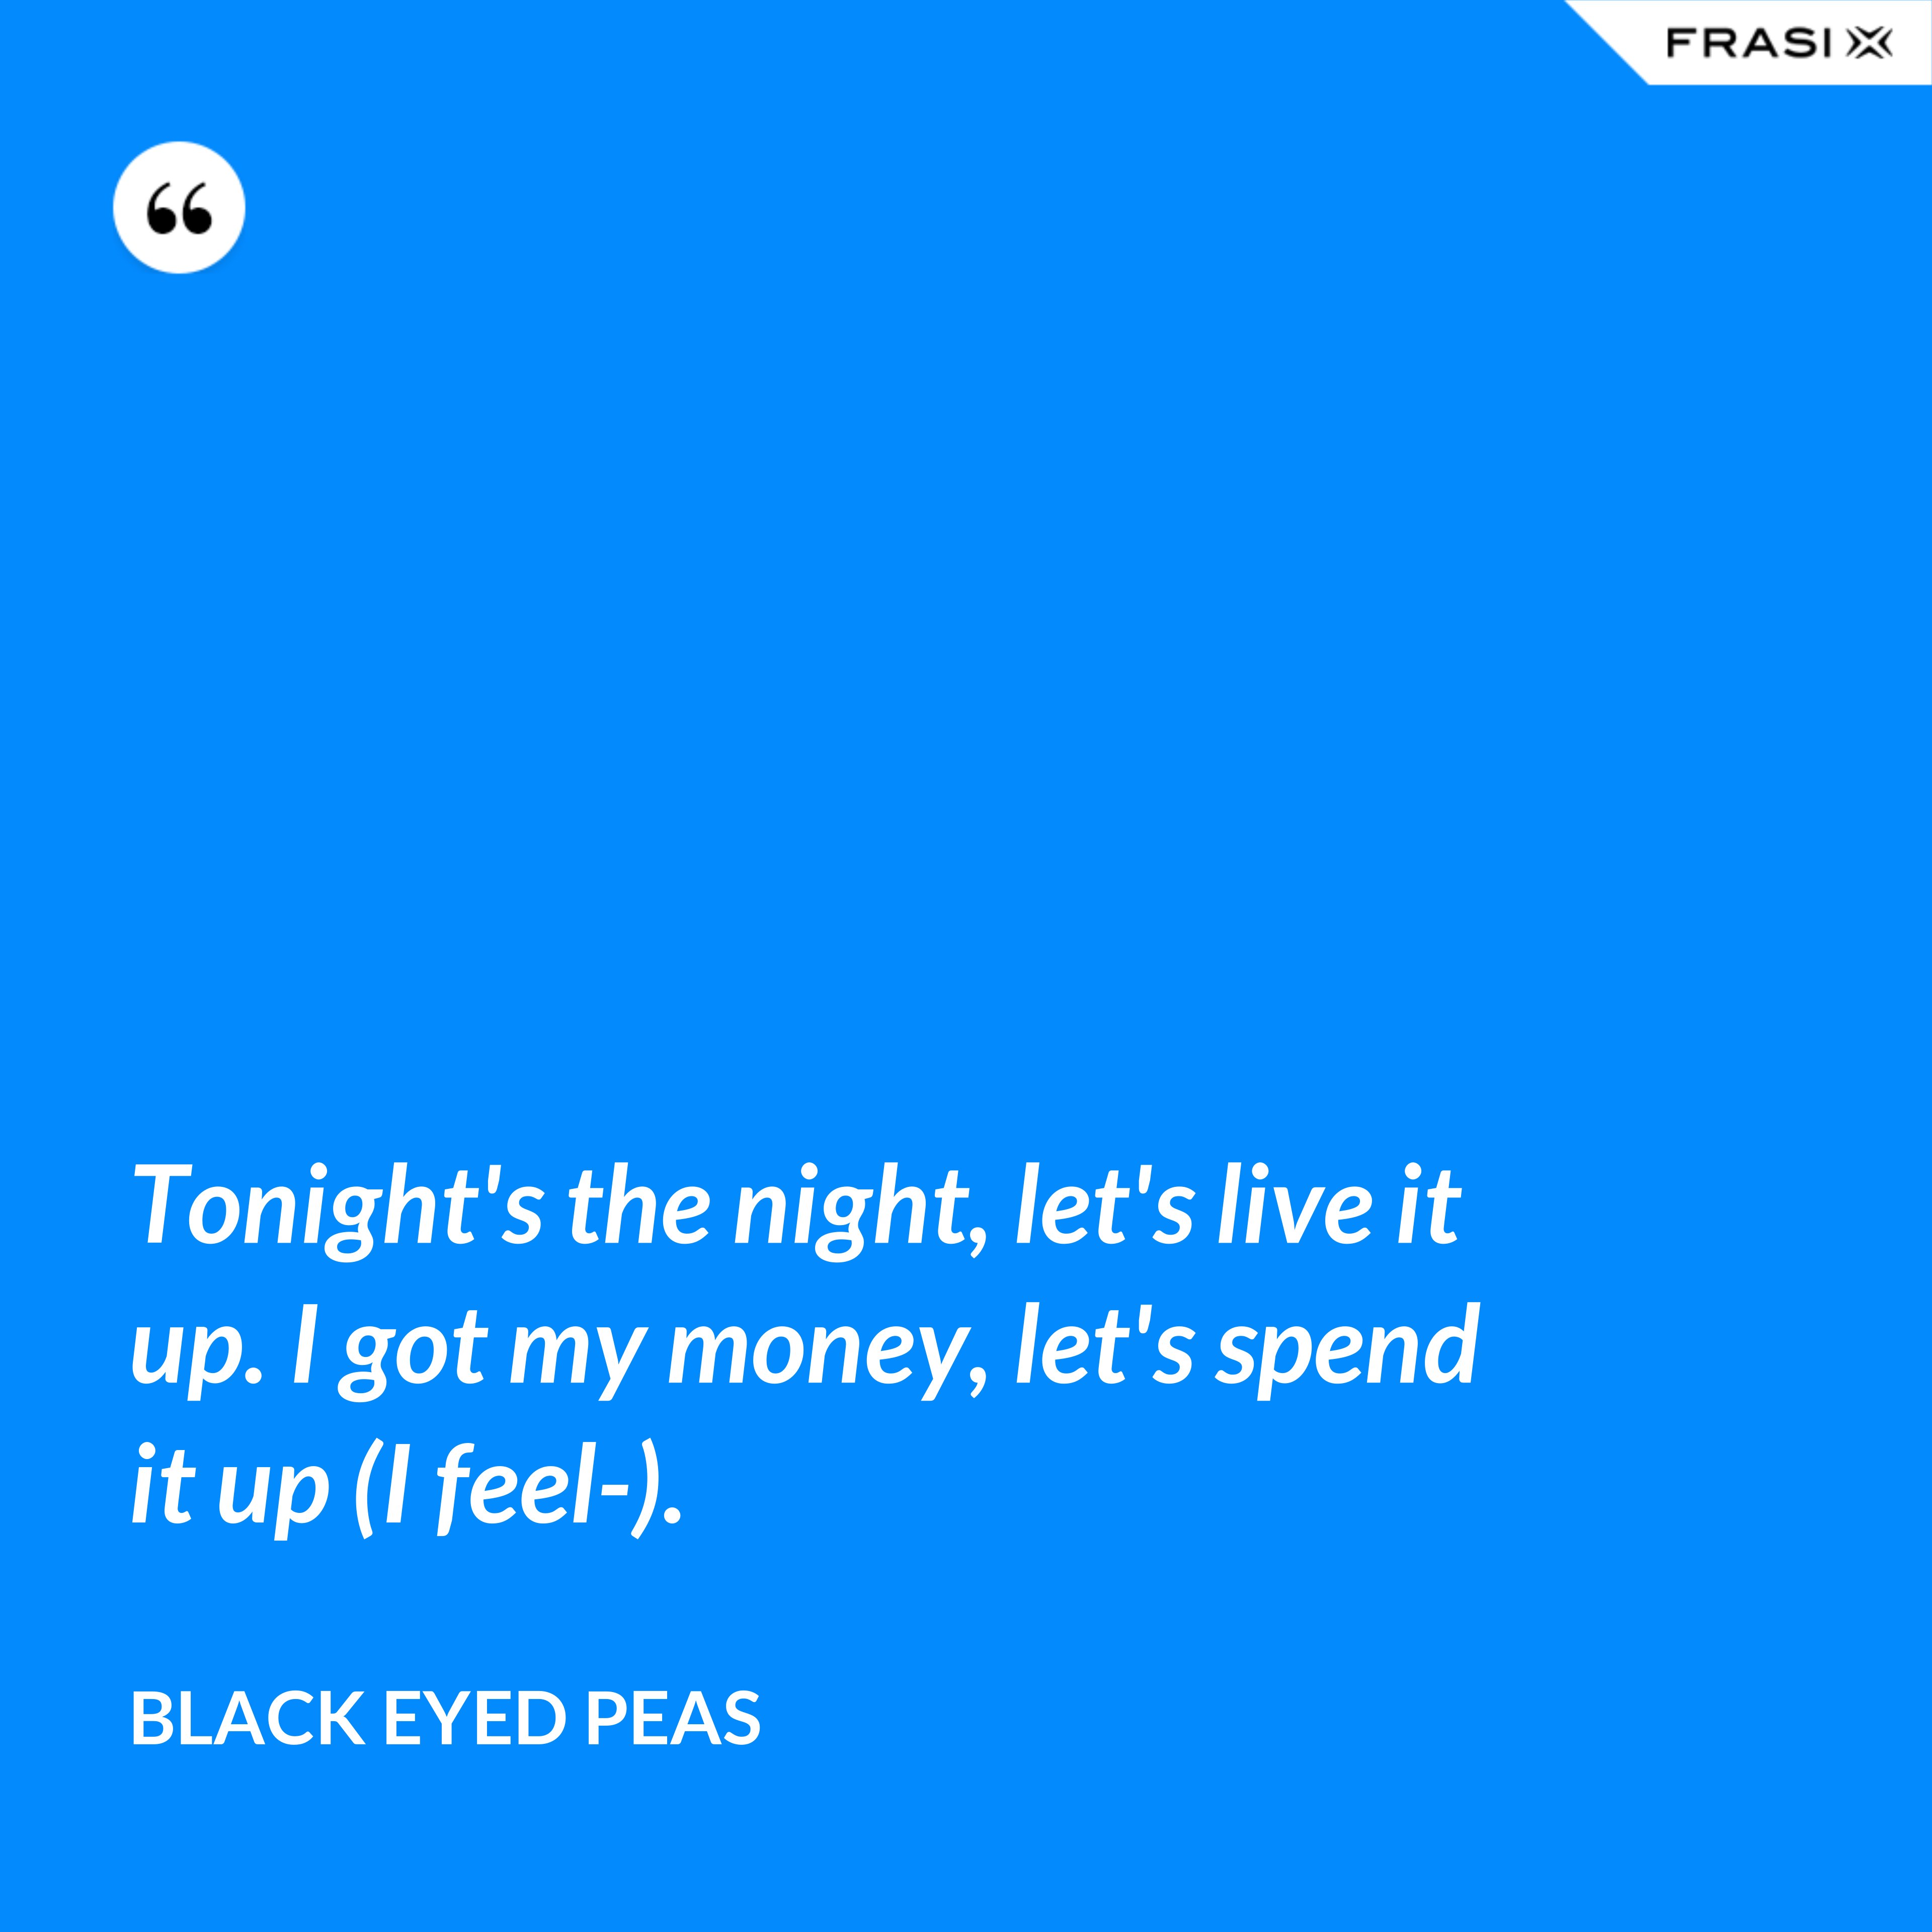 Tonight's the night, let's live it up. I got my money, let's spend it up (I feel-). - Black Eyed Peas